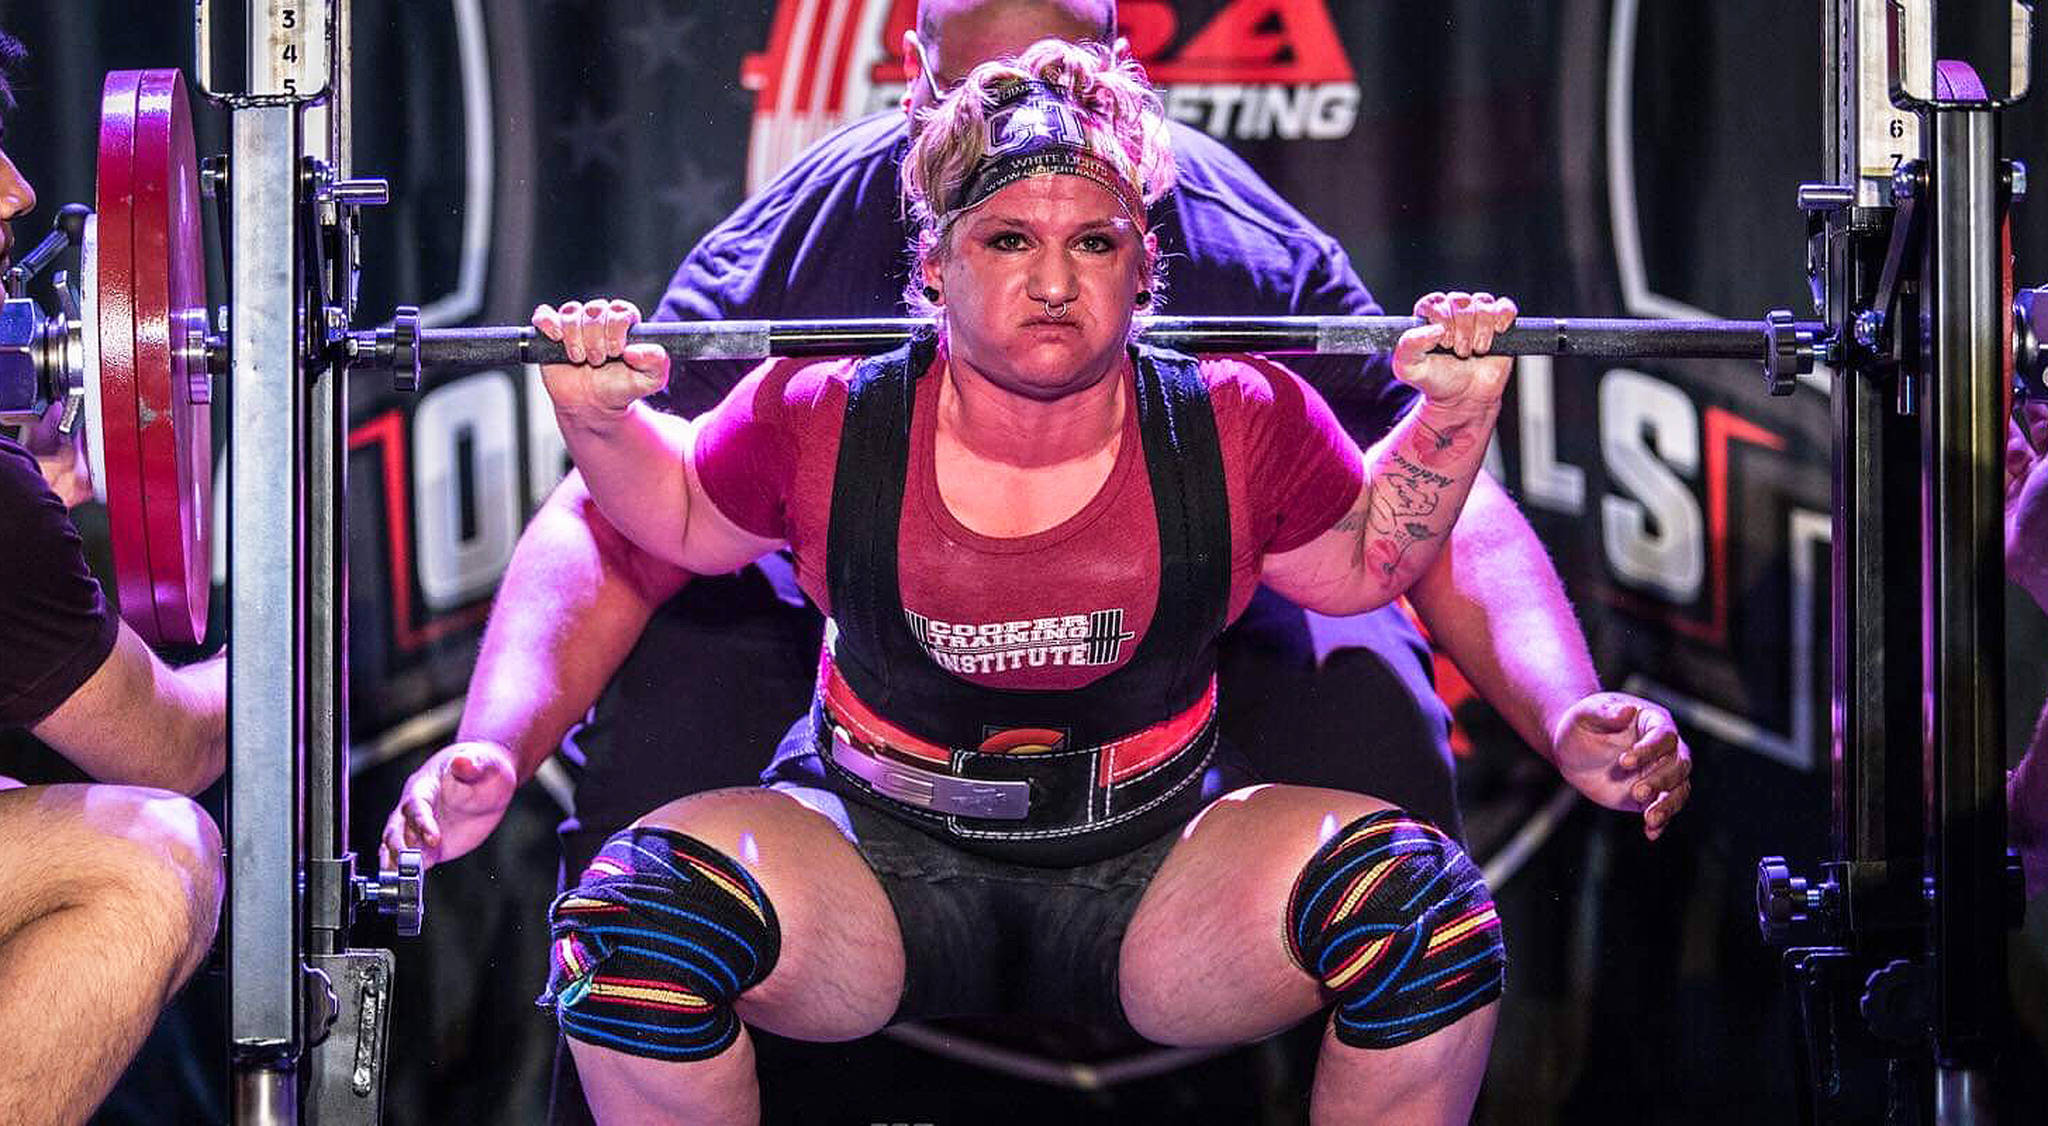 Nikiski powerlifter Billie Denison pushes through a squat lift at the USA Powerlifting Open Nationals May 10, 2019, in Lombard, Illinois. (Photo courtesy 9for9 Media)